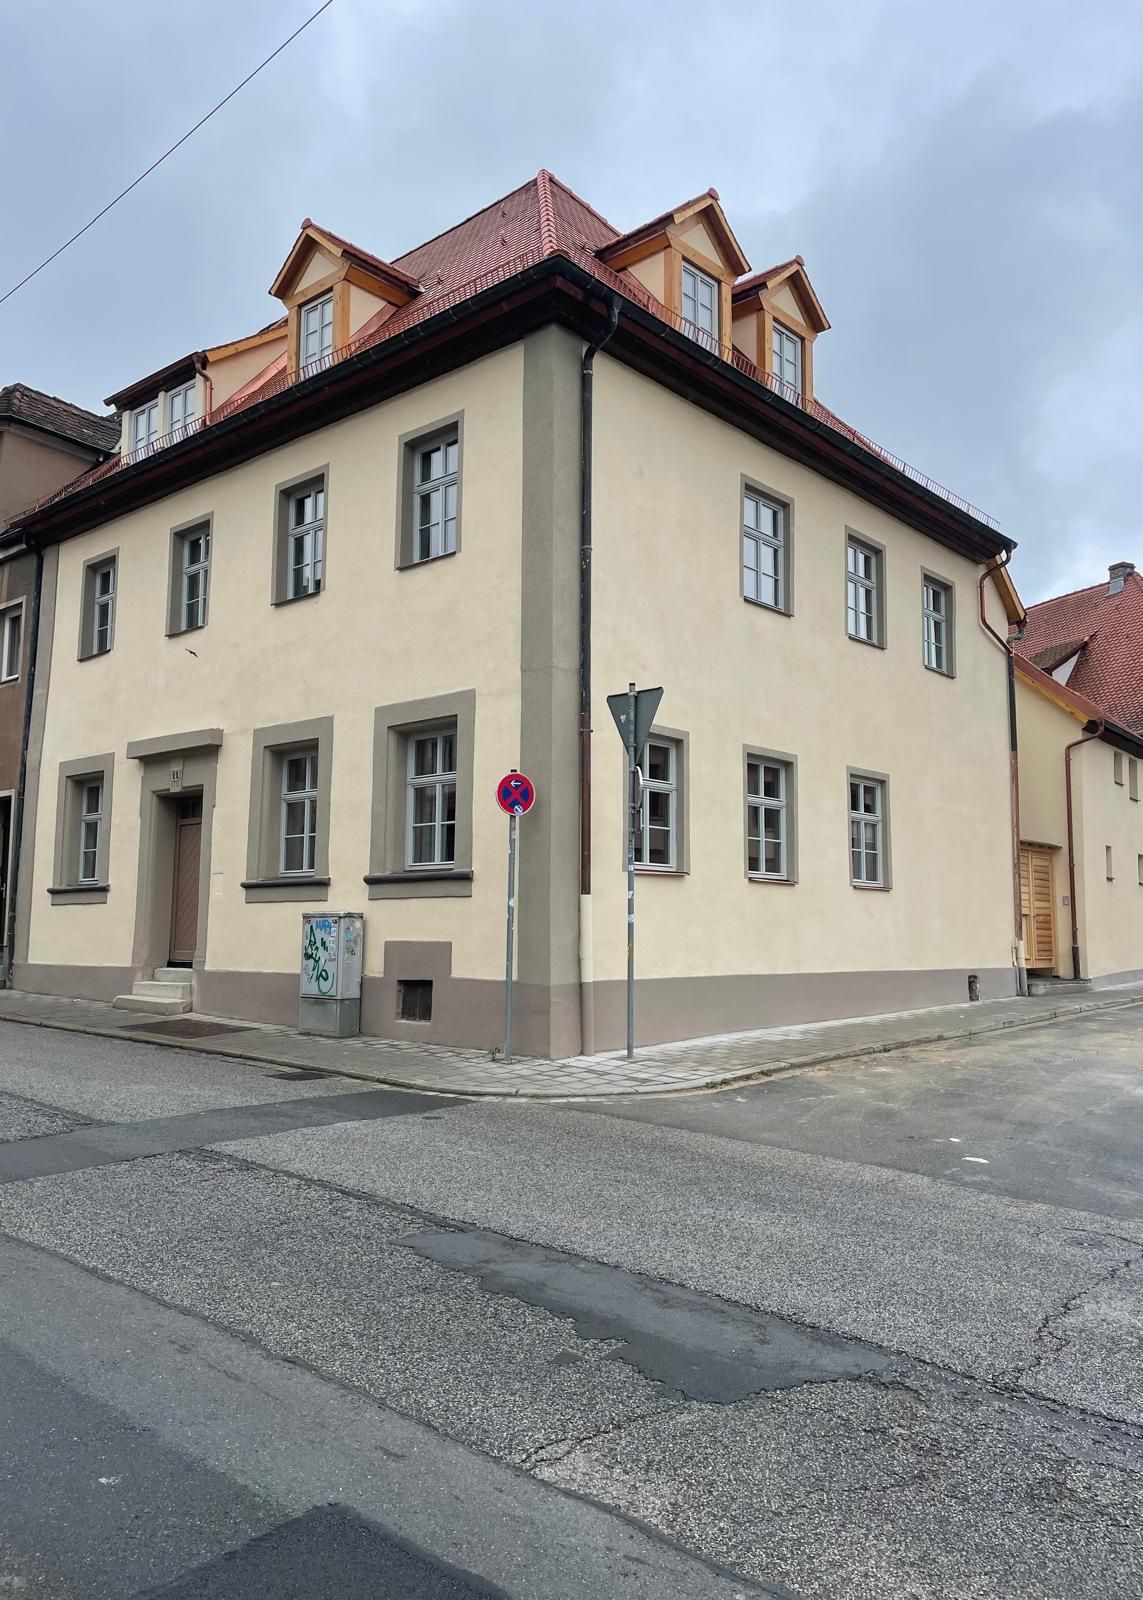 Spacious 2.5-room apartment (1st floor), contract with extension option, first occupancy, fully furnished, central, old town of Erlangen (price incl. 7 % VAT)